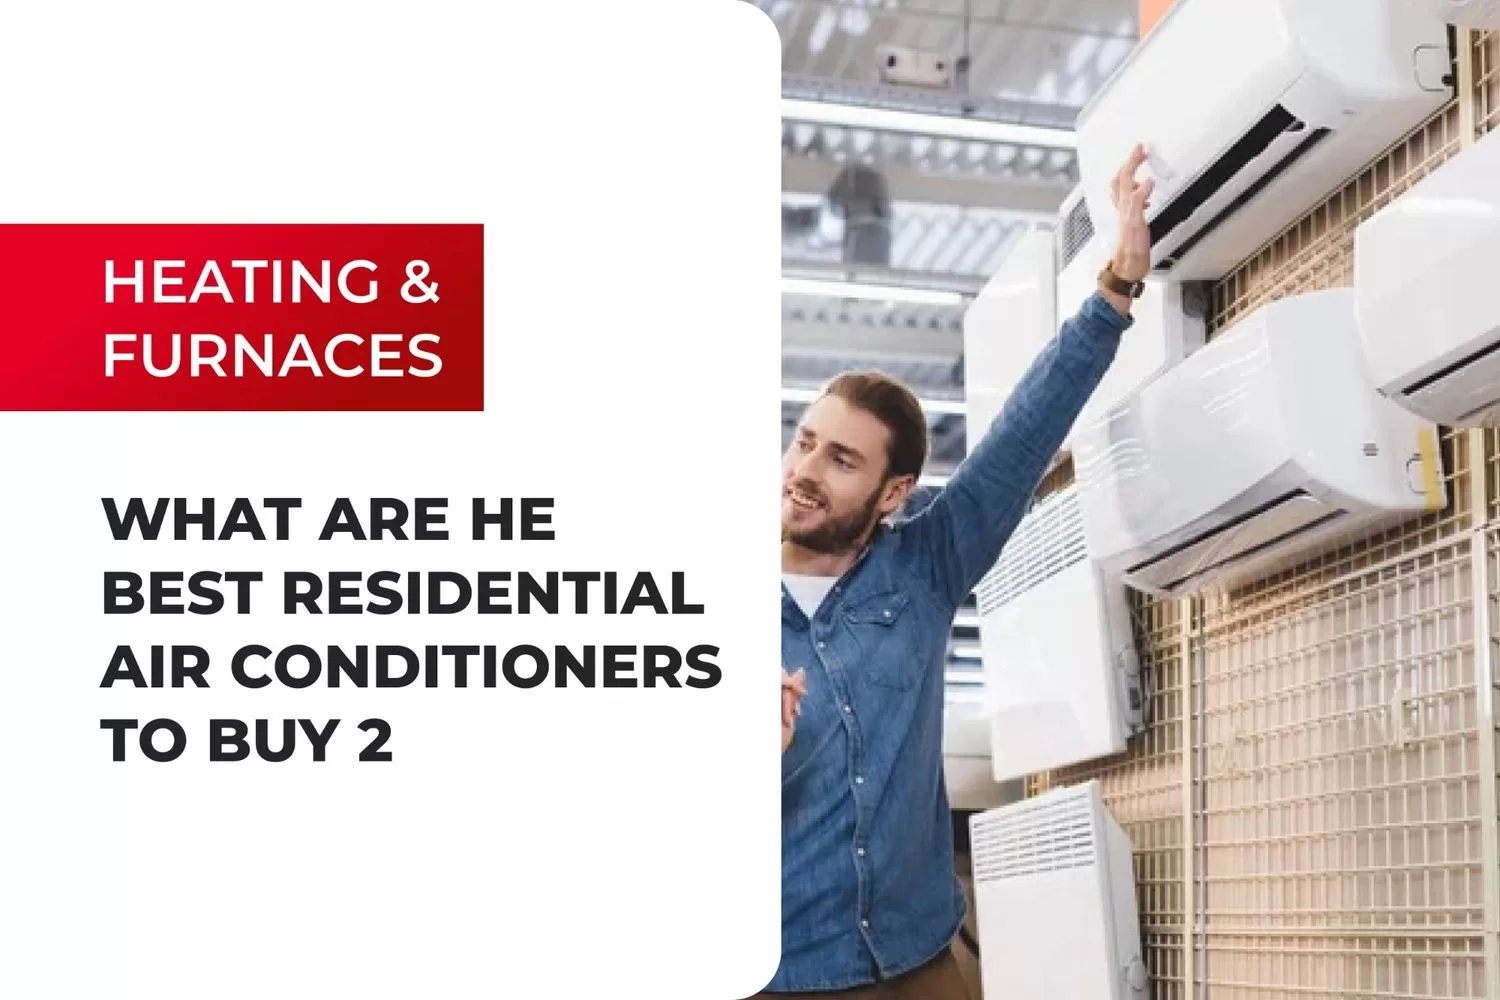 What Are The Best Residential Air Conditioners To Buy?